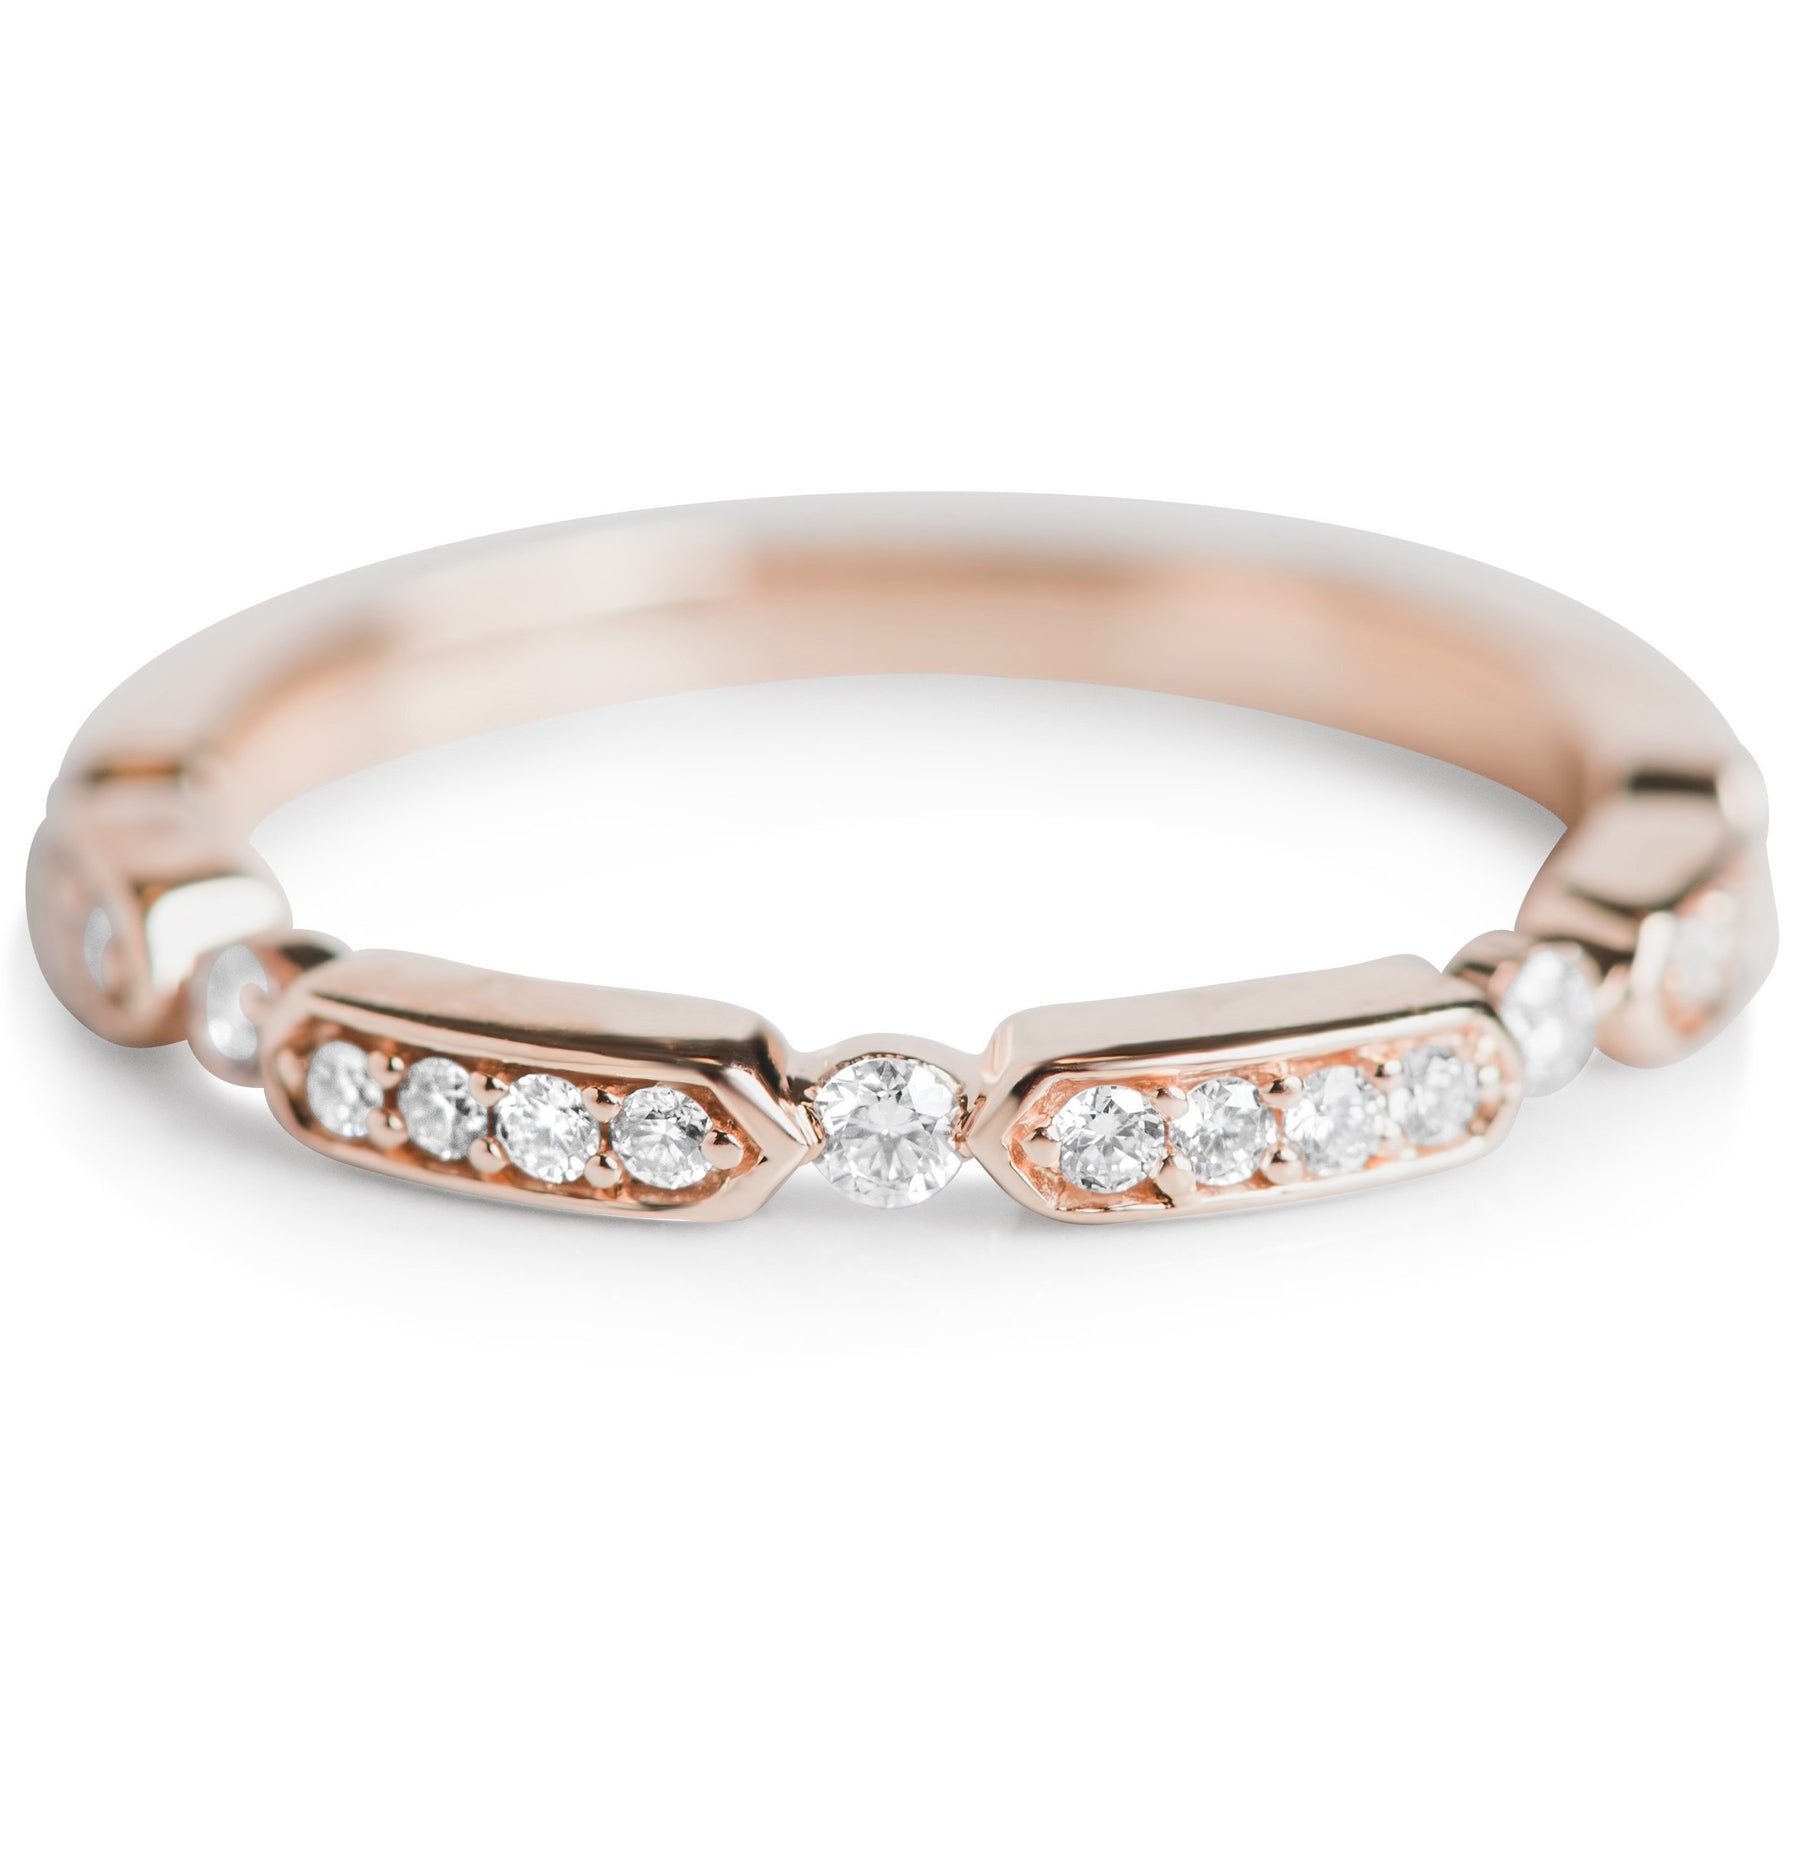 rose gold and white diamond stack ring or wedding band